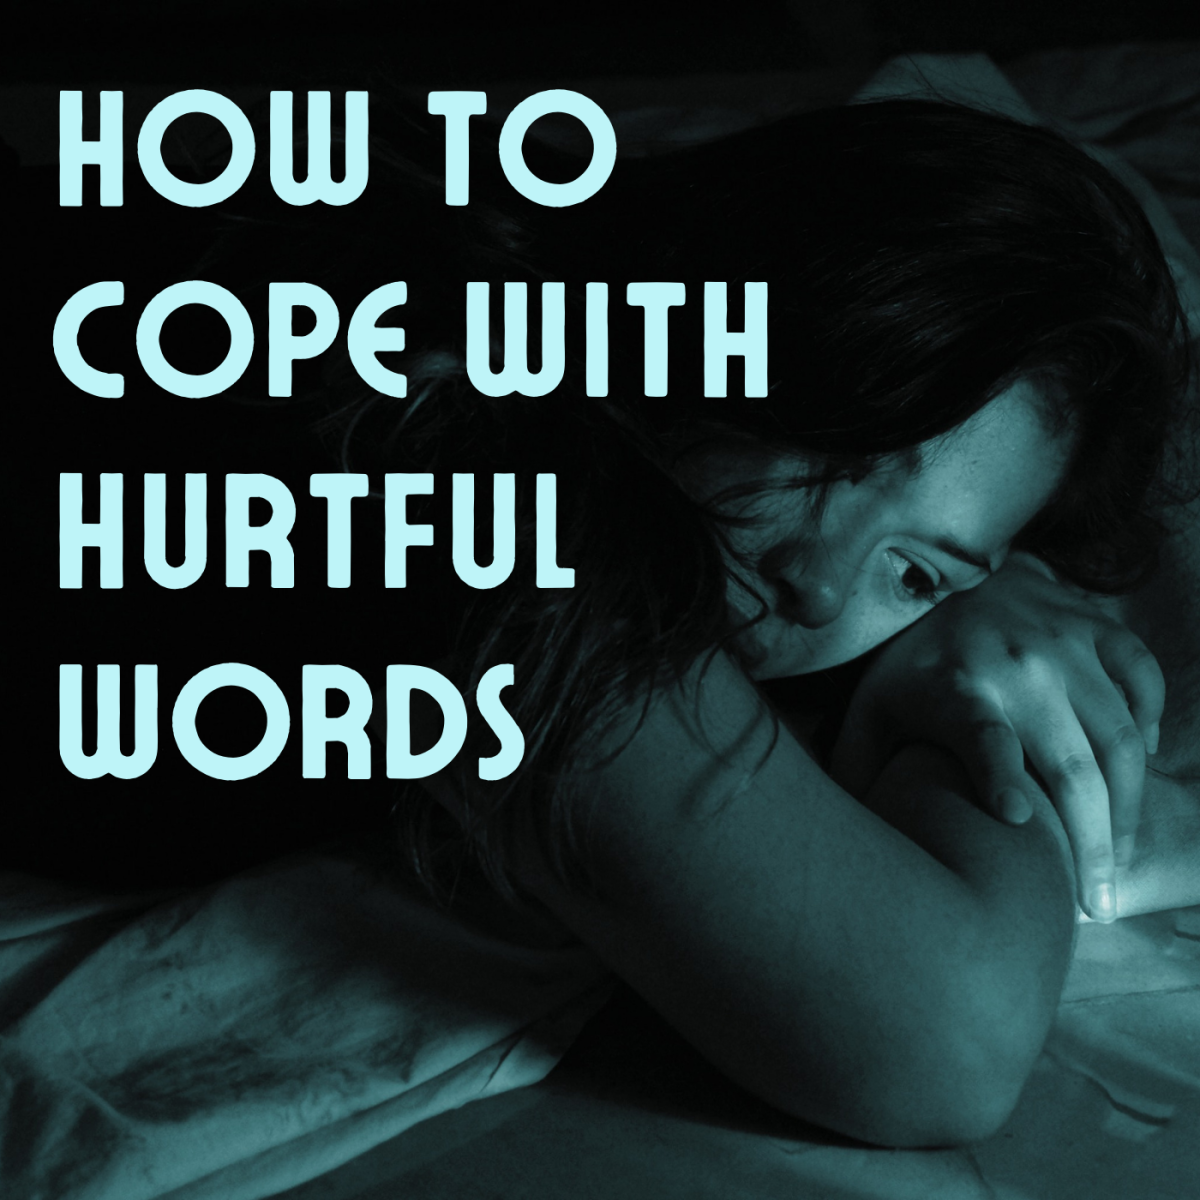 Words have the power to hurt. If someone has said something hurtful to you, learn how to deal with the pain.